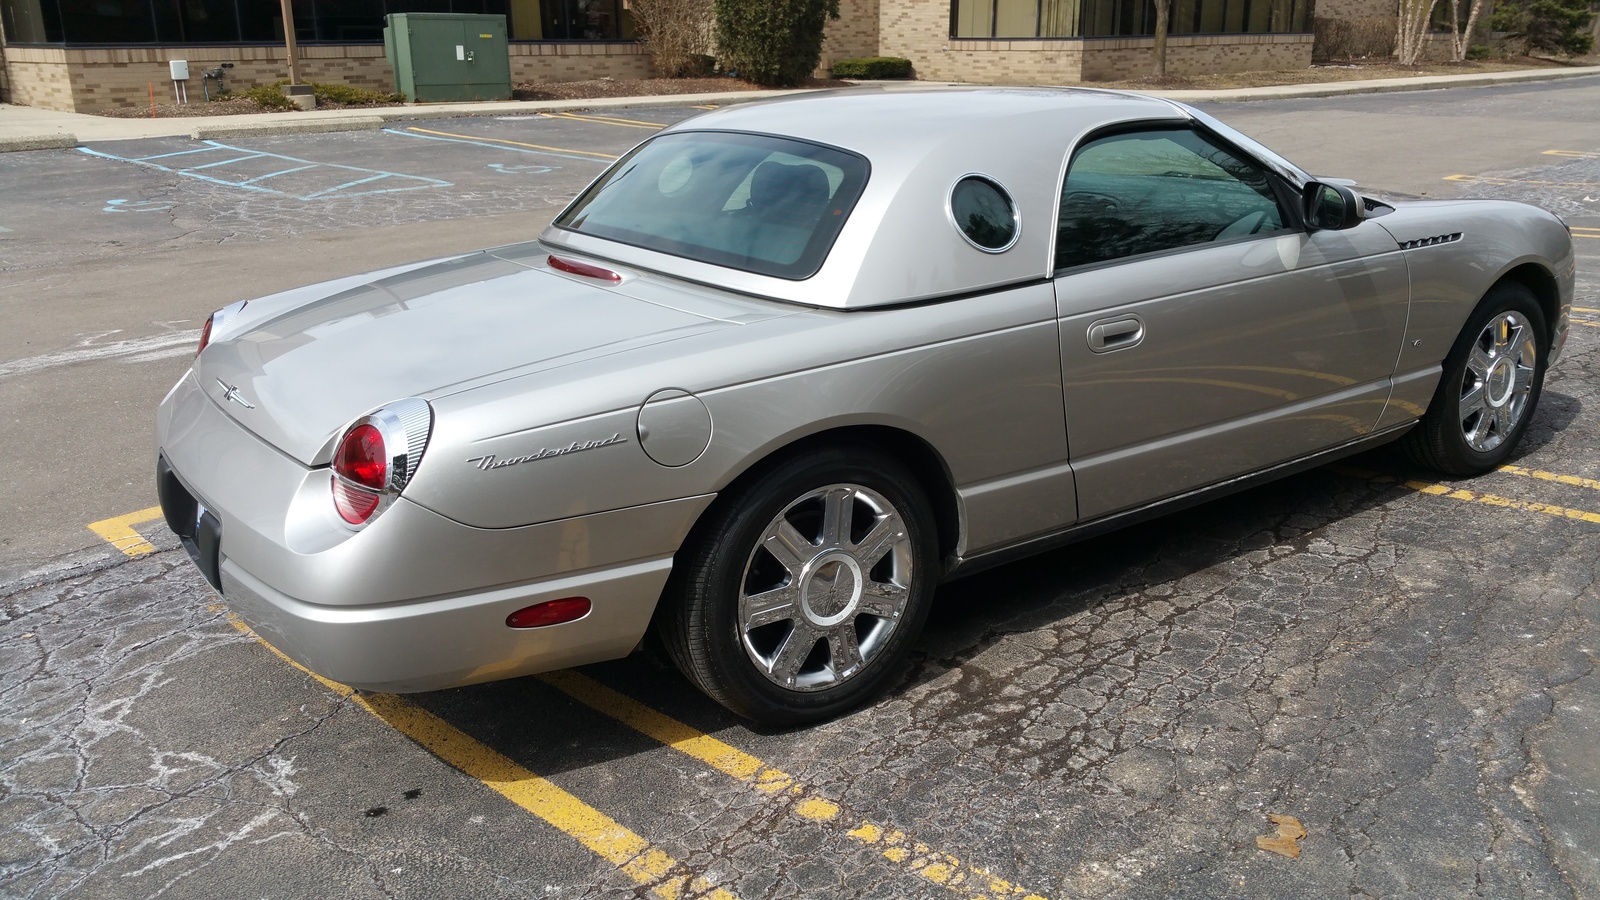 2004 Ford thunderbird convertible review #9